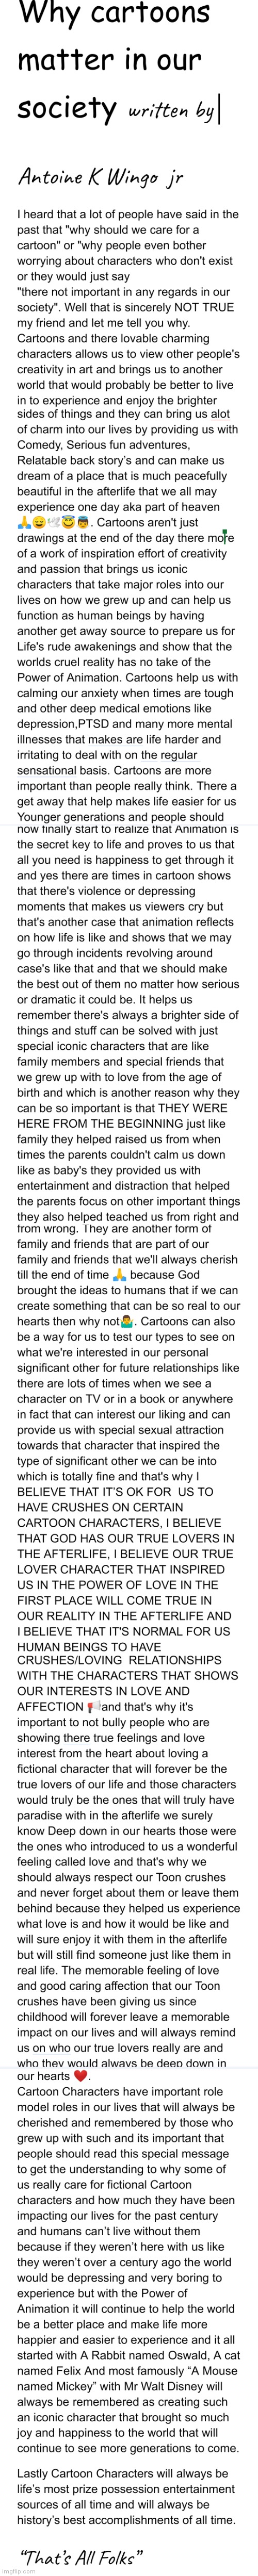 The True reason why cartoons are very important to our society. A true message (sorry if the passage is to long) | image tagged in cartoons are important in our society,cartoons,true message everyone needs to hear,written by aj super star | made w/ Imgflip meme maker